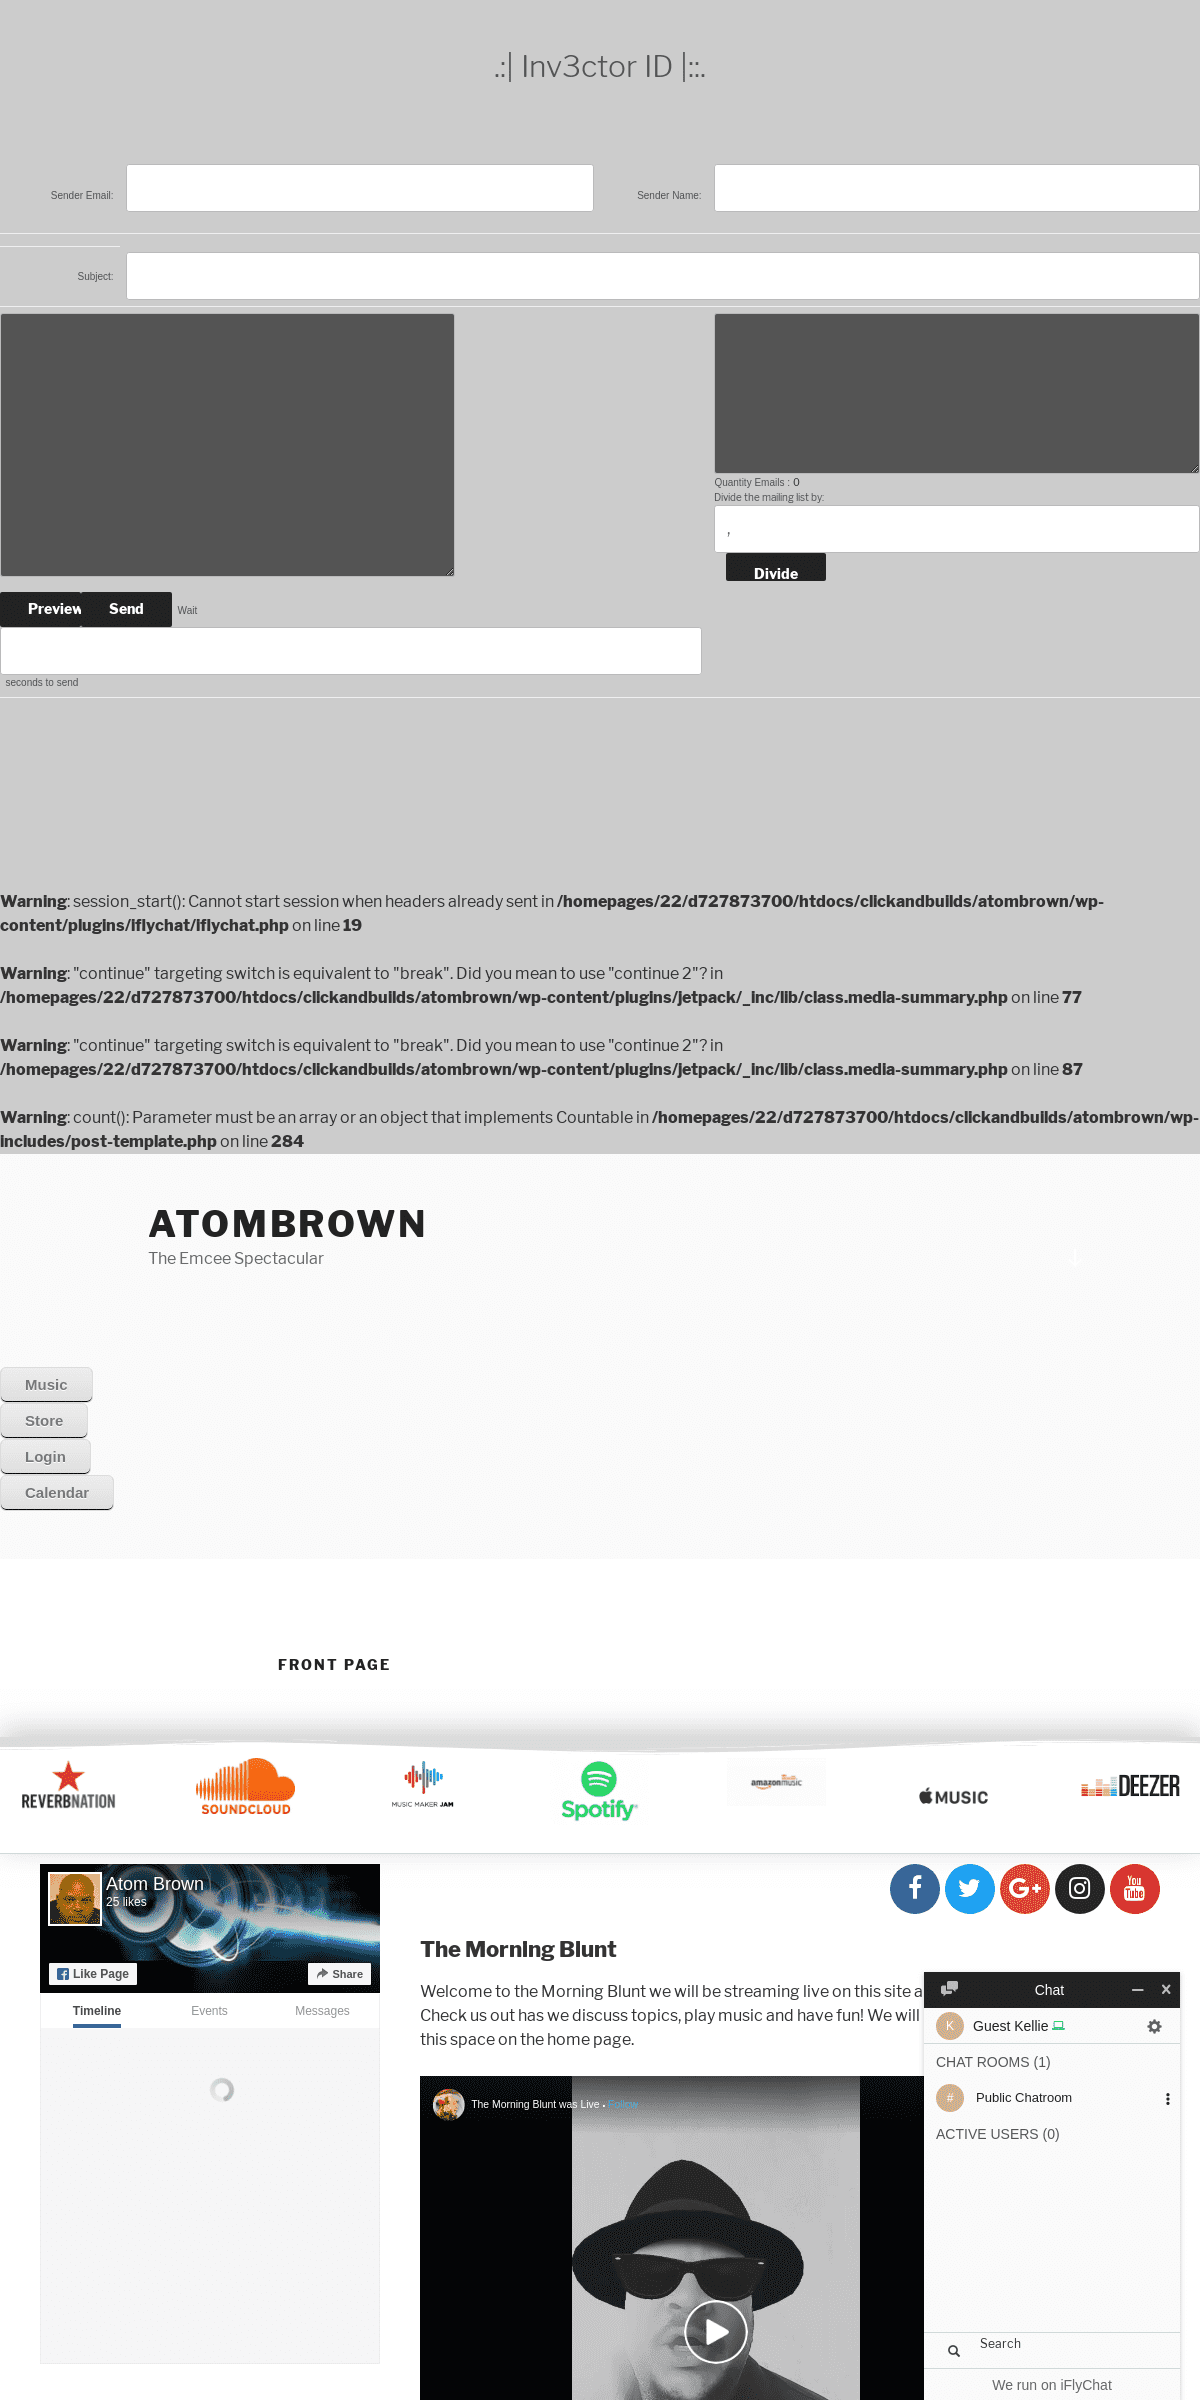 A complete backup of atombrown.com